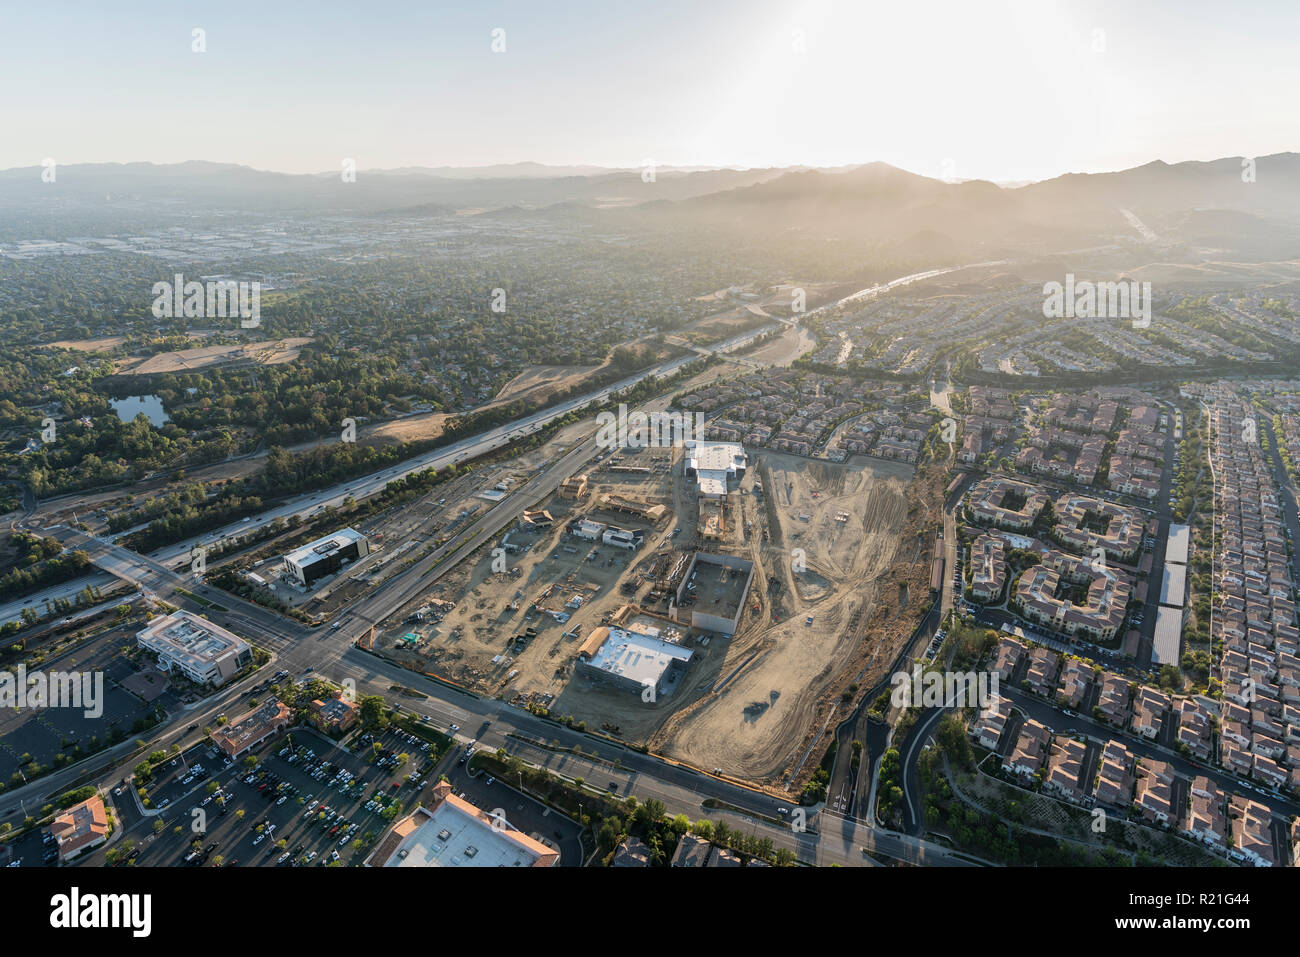 Aerial afternoon view of shopping center construction, Rinaldi Street and the 118 freeway in the Porter Ranch neighborhood of Los Angeles, California. Stock Photo